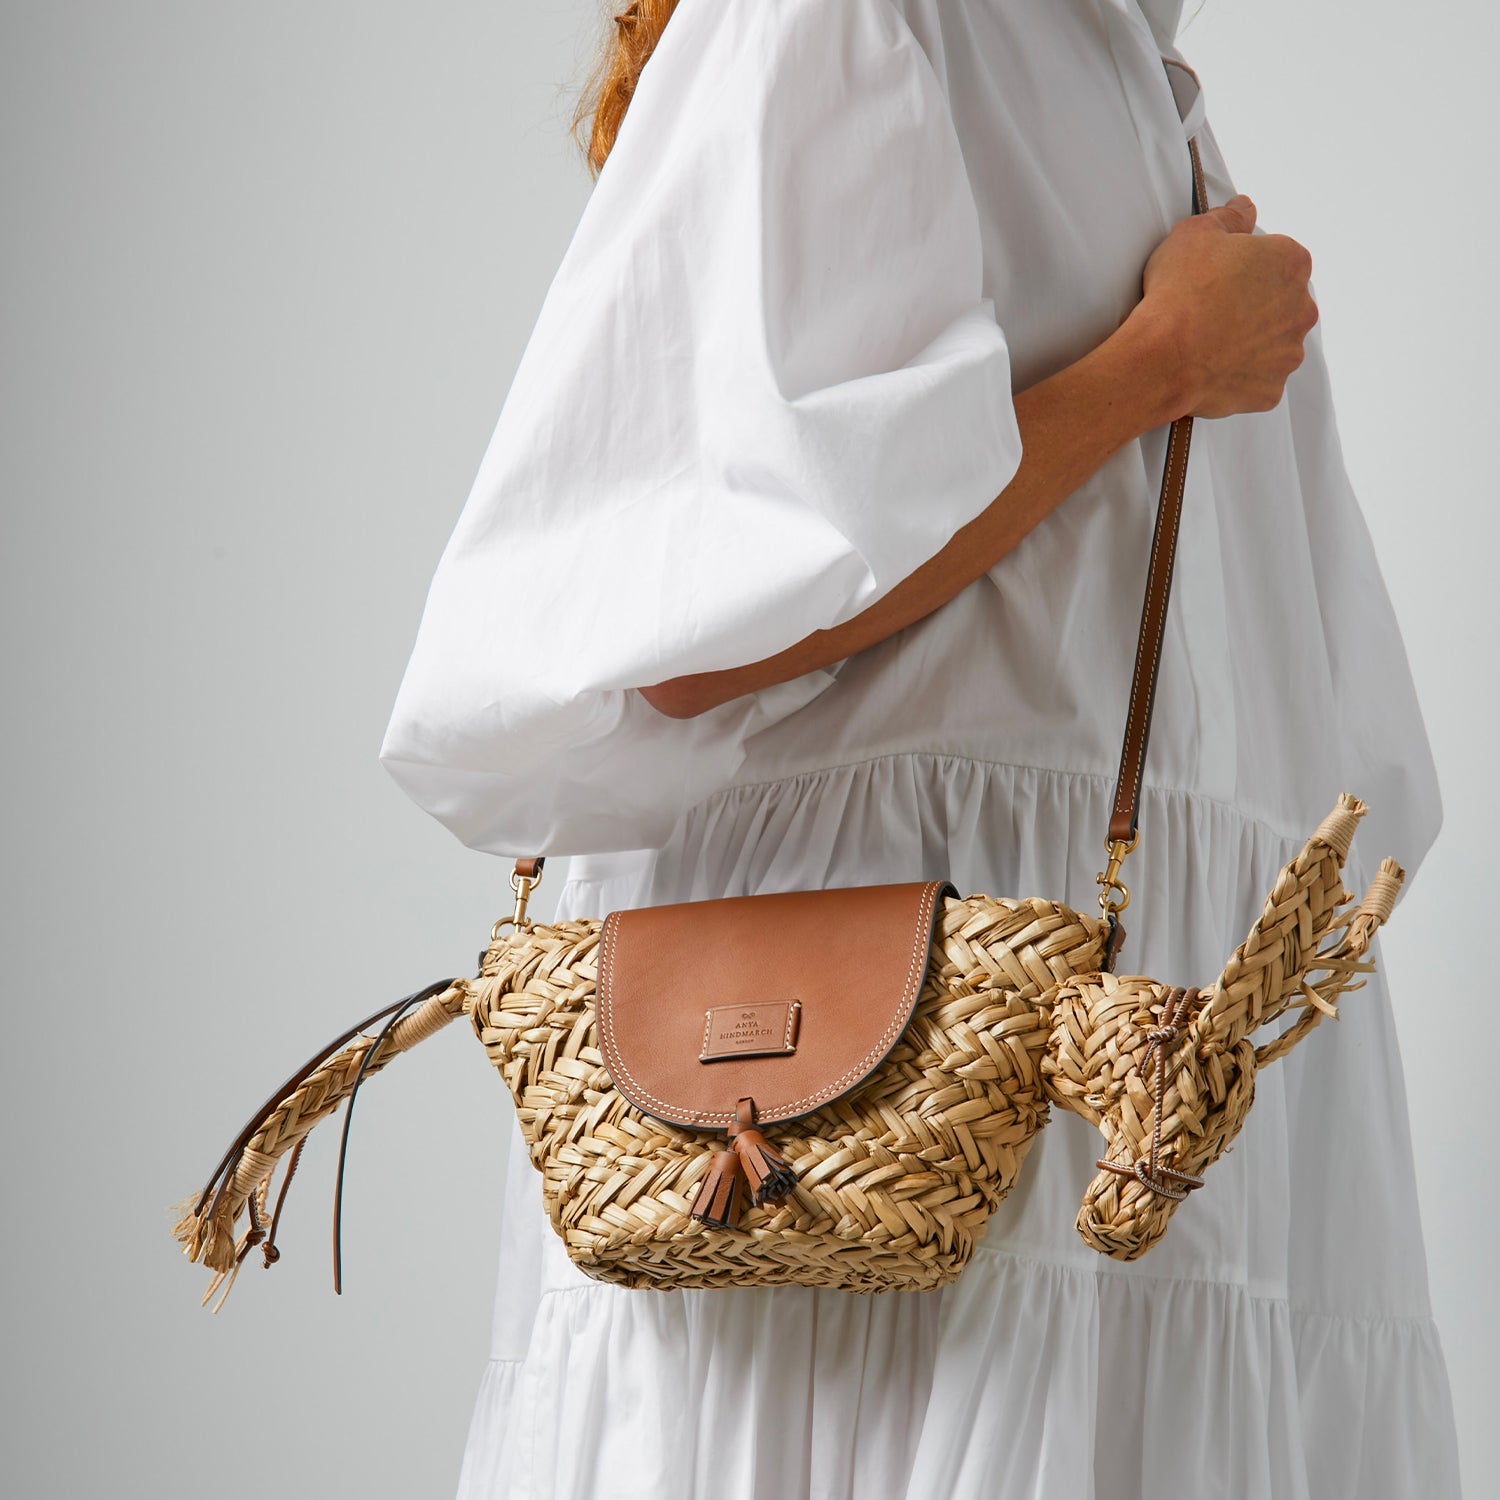 Donkey Basket Cross-Body -

                  
                    Seagrass in Natural -
                  

                  Anya Hindmarch UK
